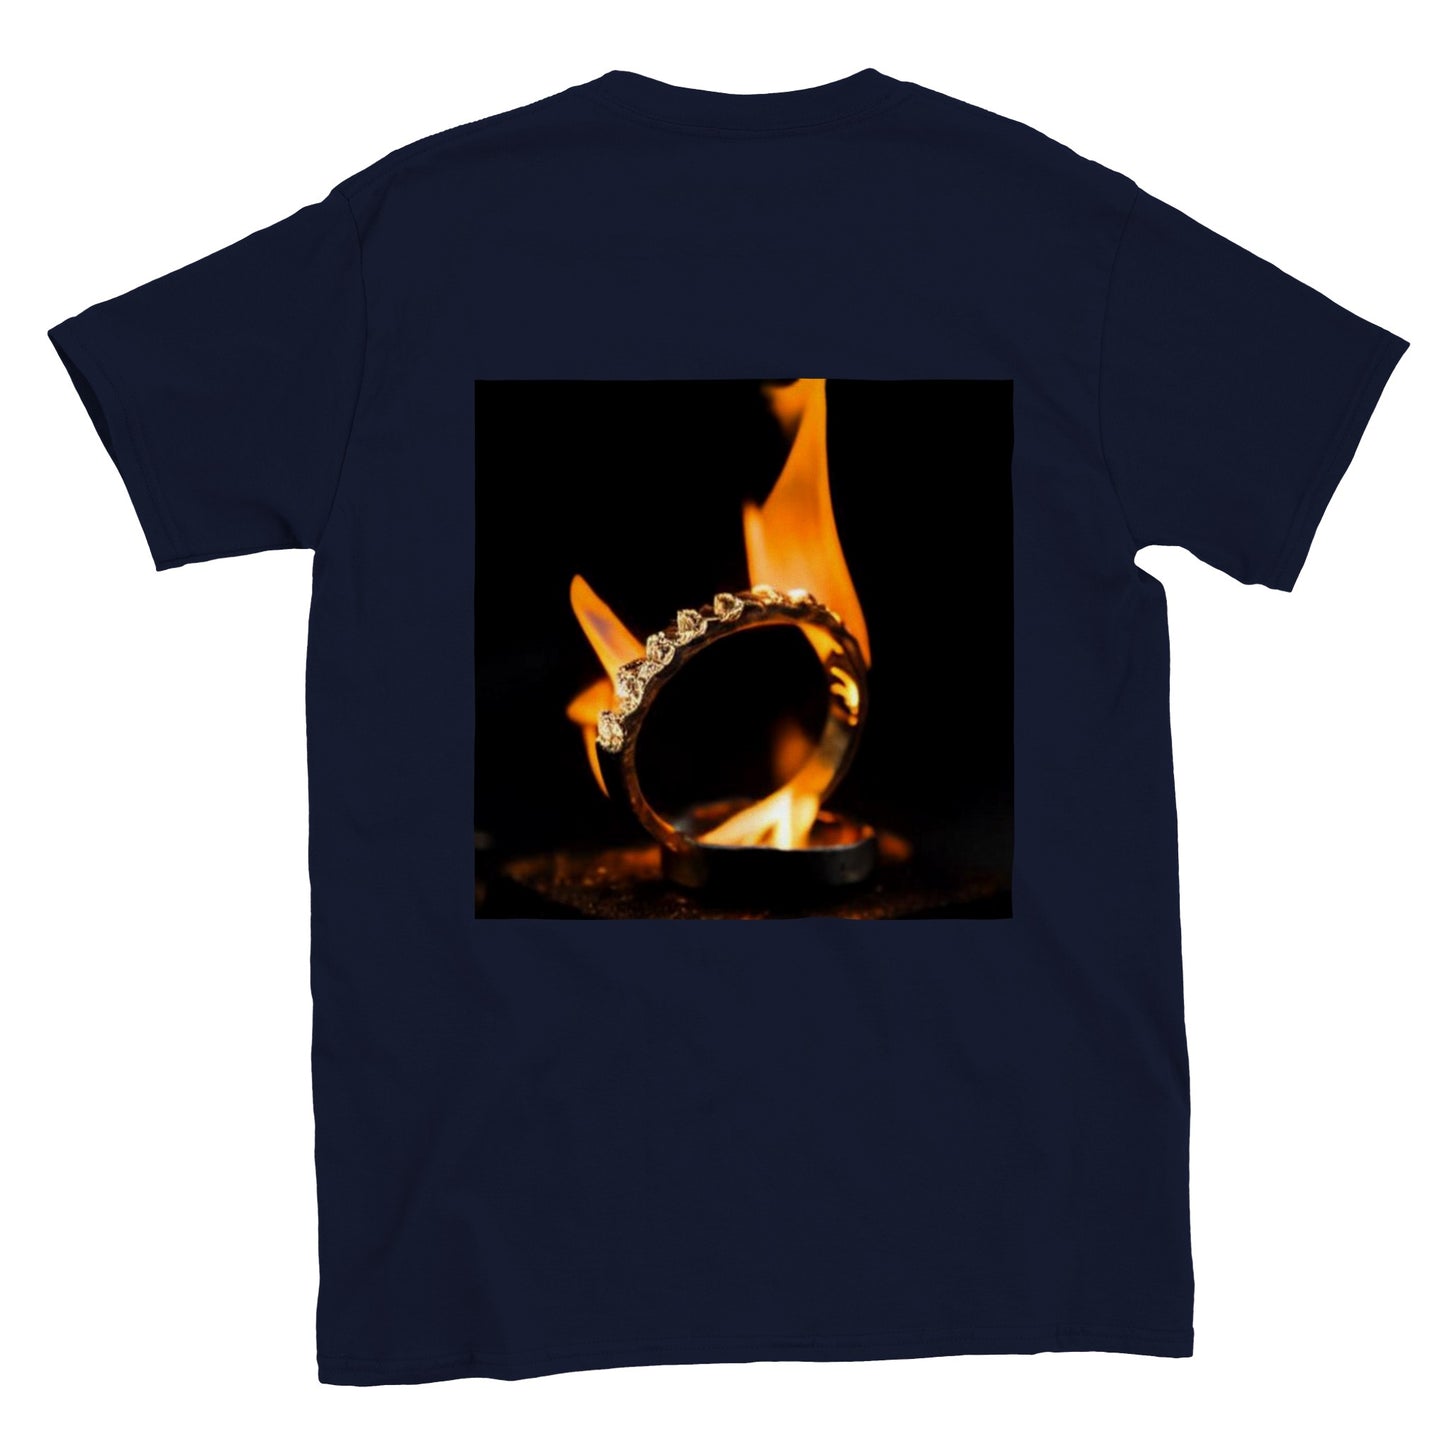 Classic Unisex Crewneck T-shirt "The Ring of Fire"